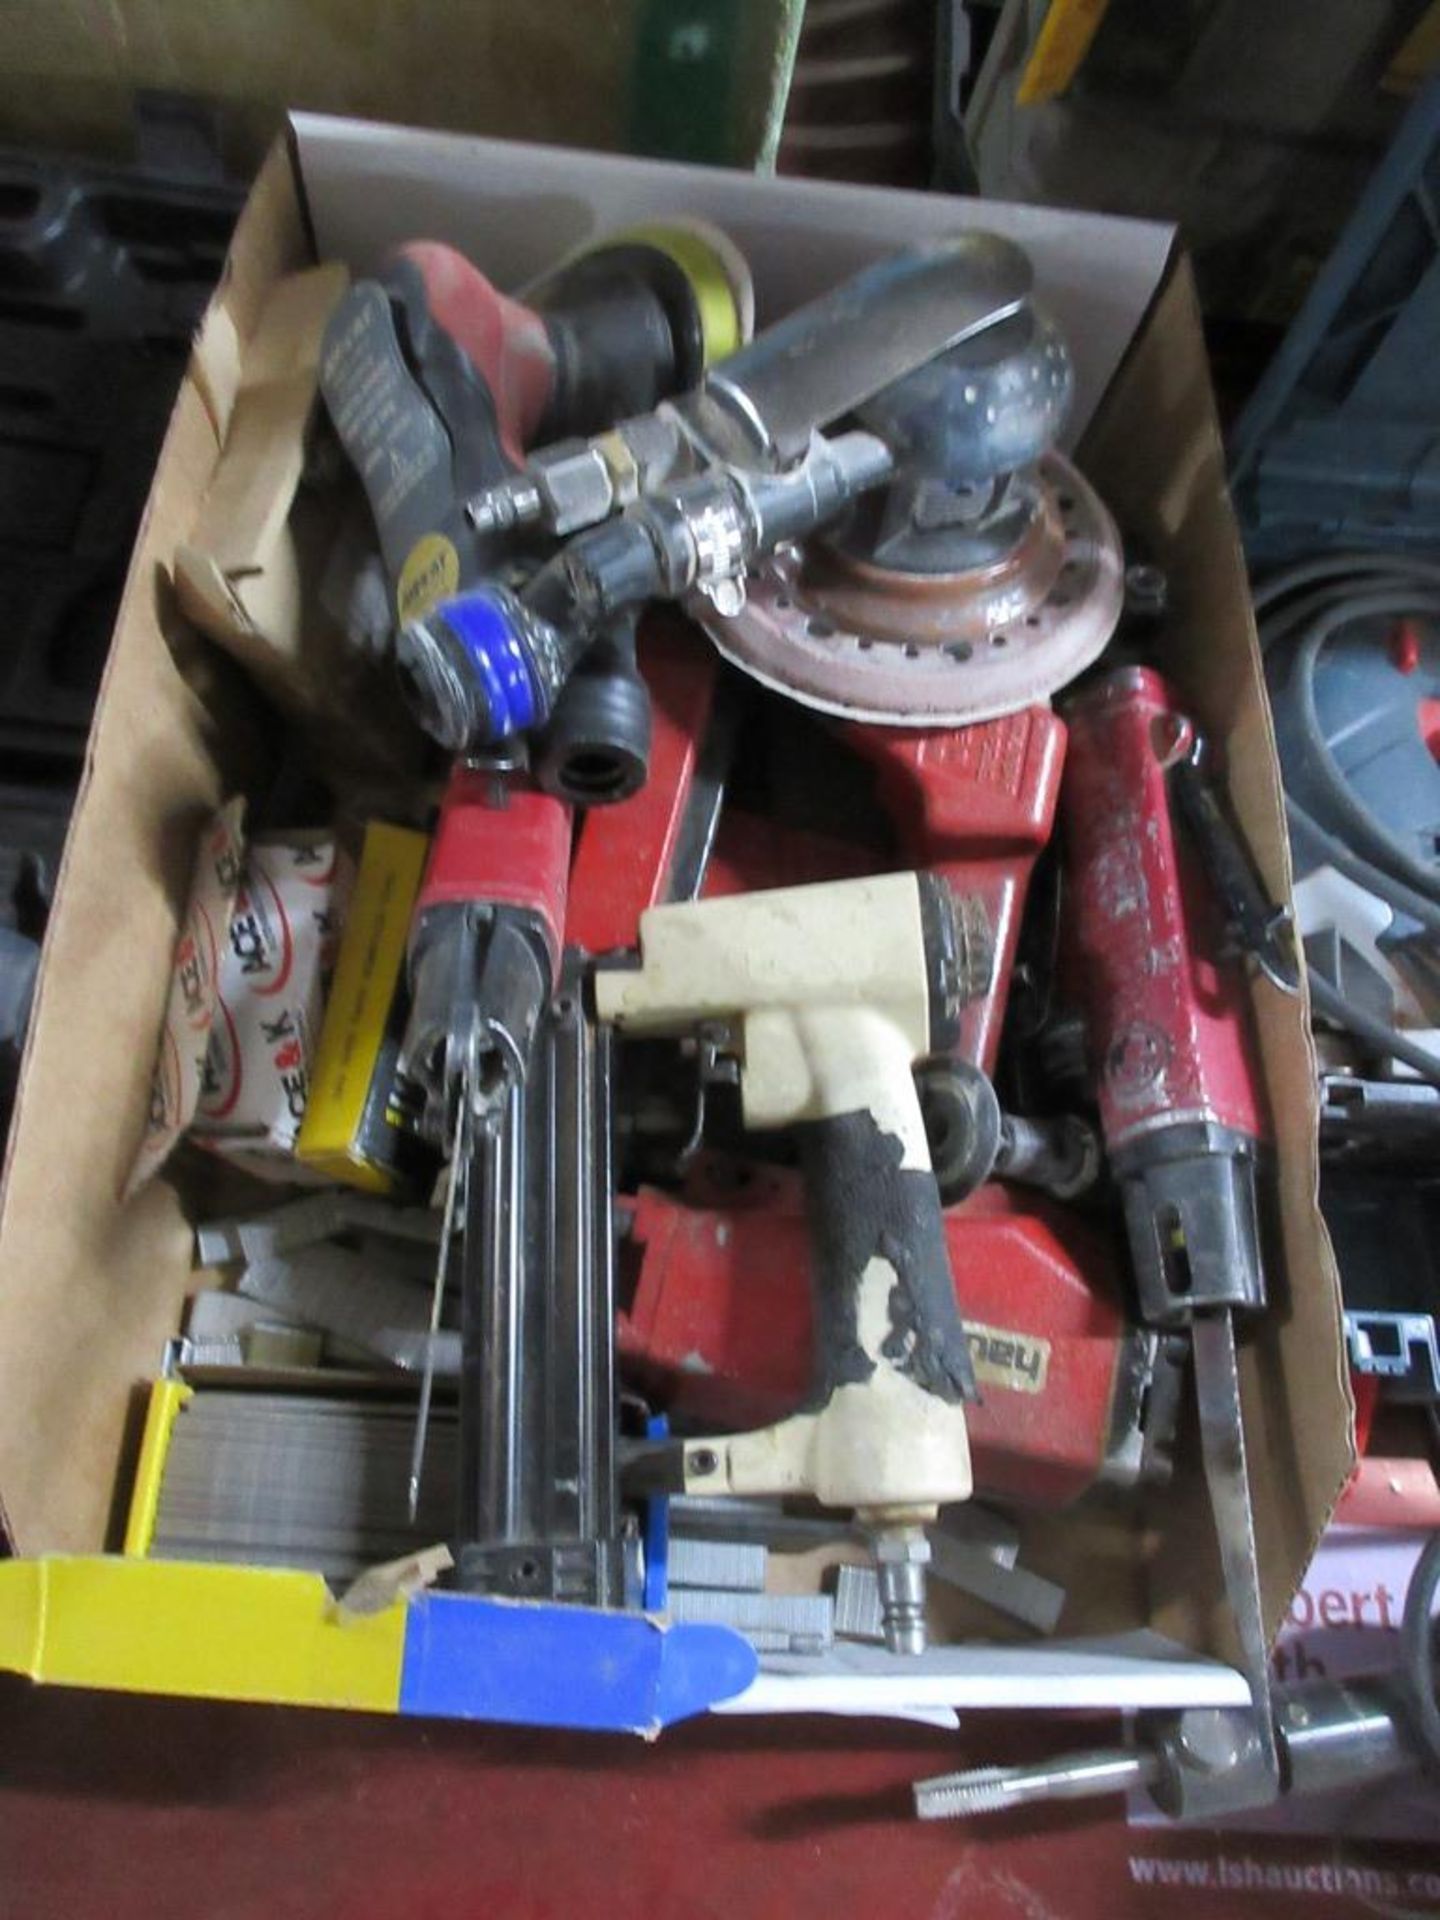 Assorted power tools including orbital sanders, reciprocating saws, nailers etc